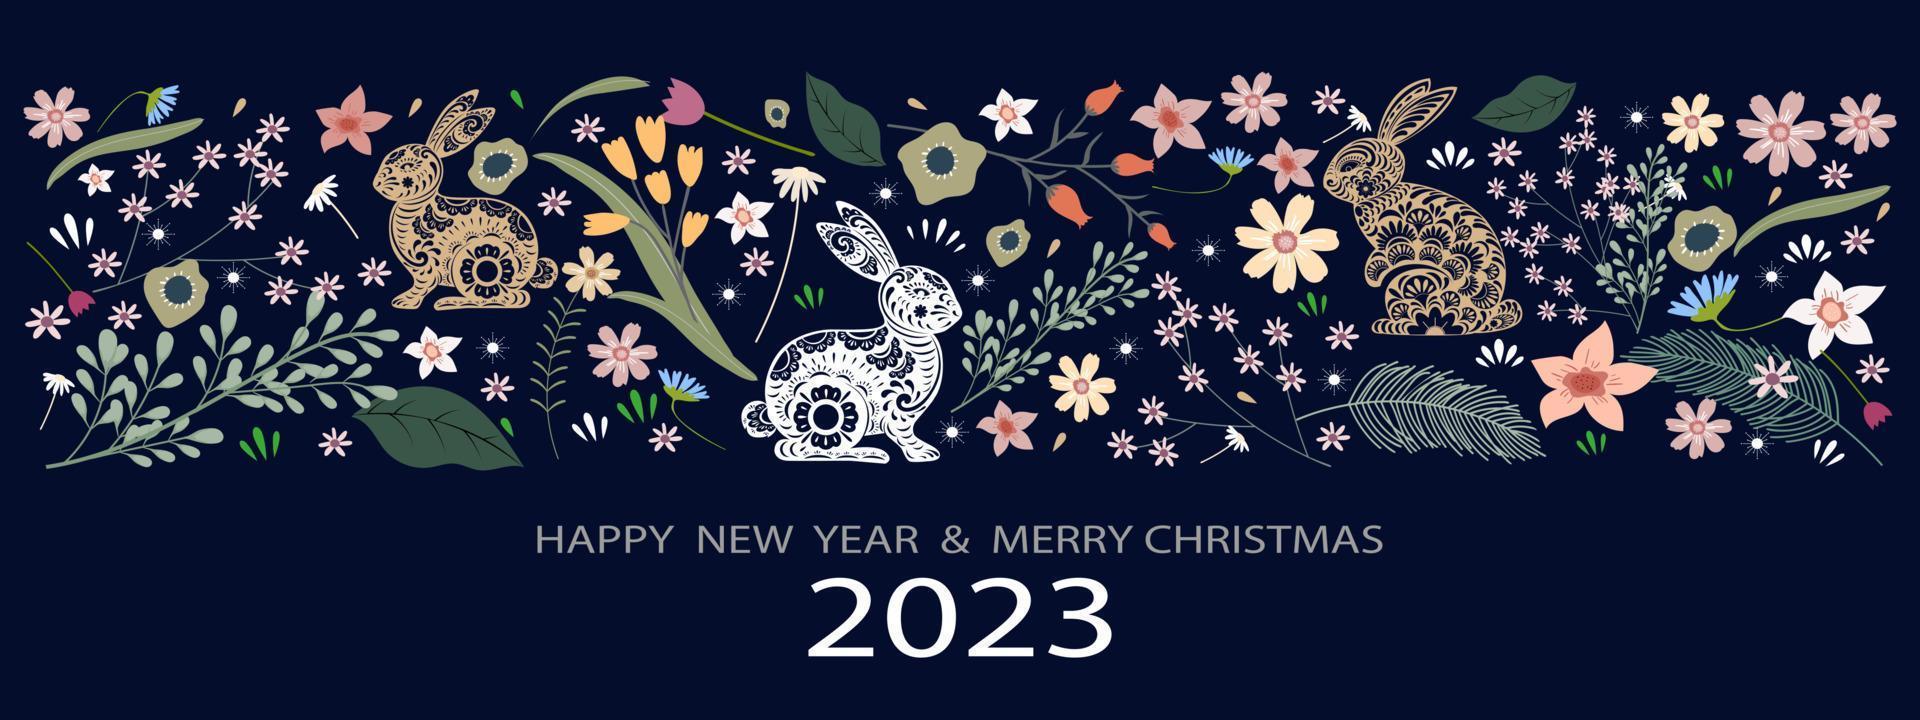 2023 Happy New Year and Mery Christmas banner,Vector Beautiful Greeting card or backdrop for Paper cut rabbits with cute multicolour of Spring flowers and other elements on blue background. vector